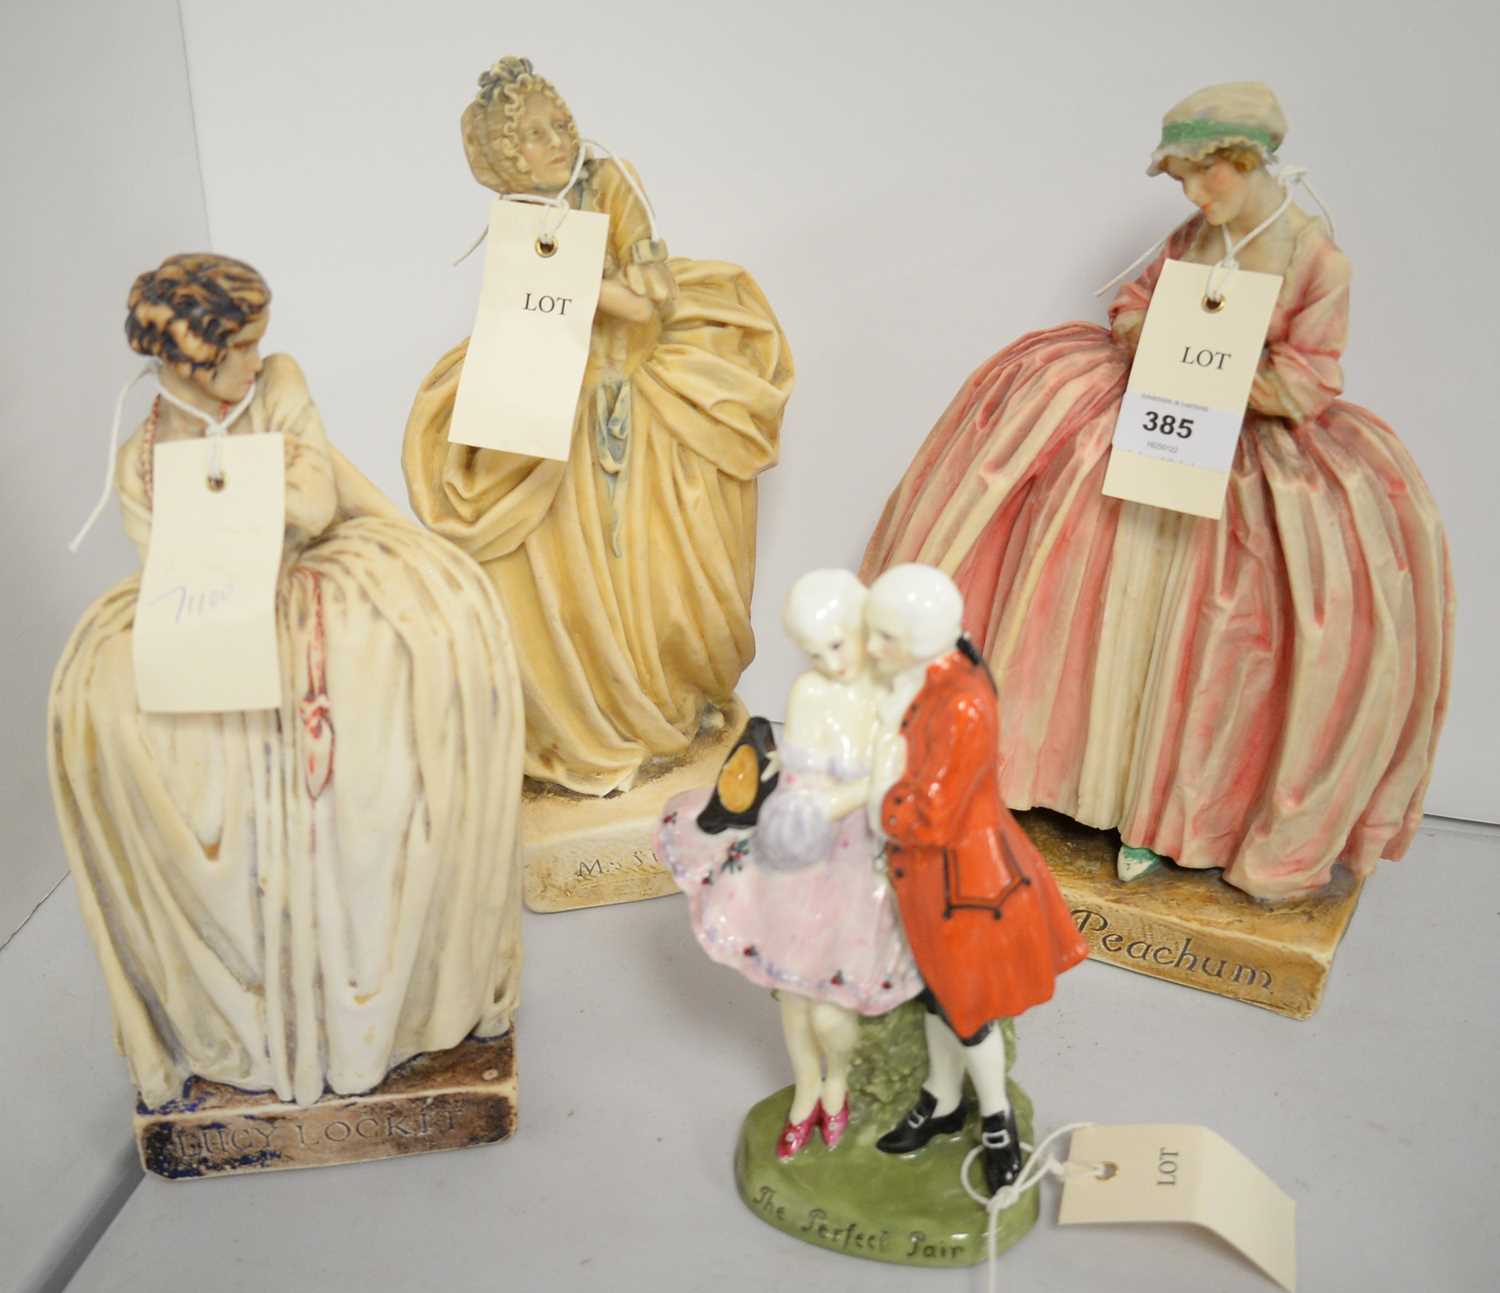 Lot 385 - A Royal Doulton ceramic figure and three others